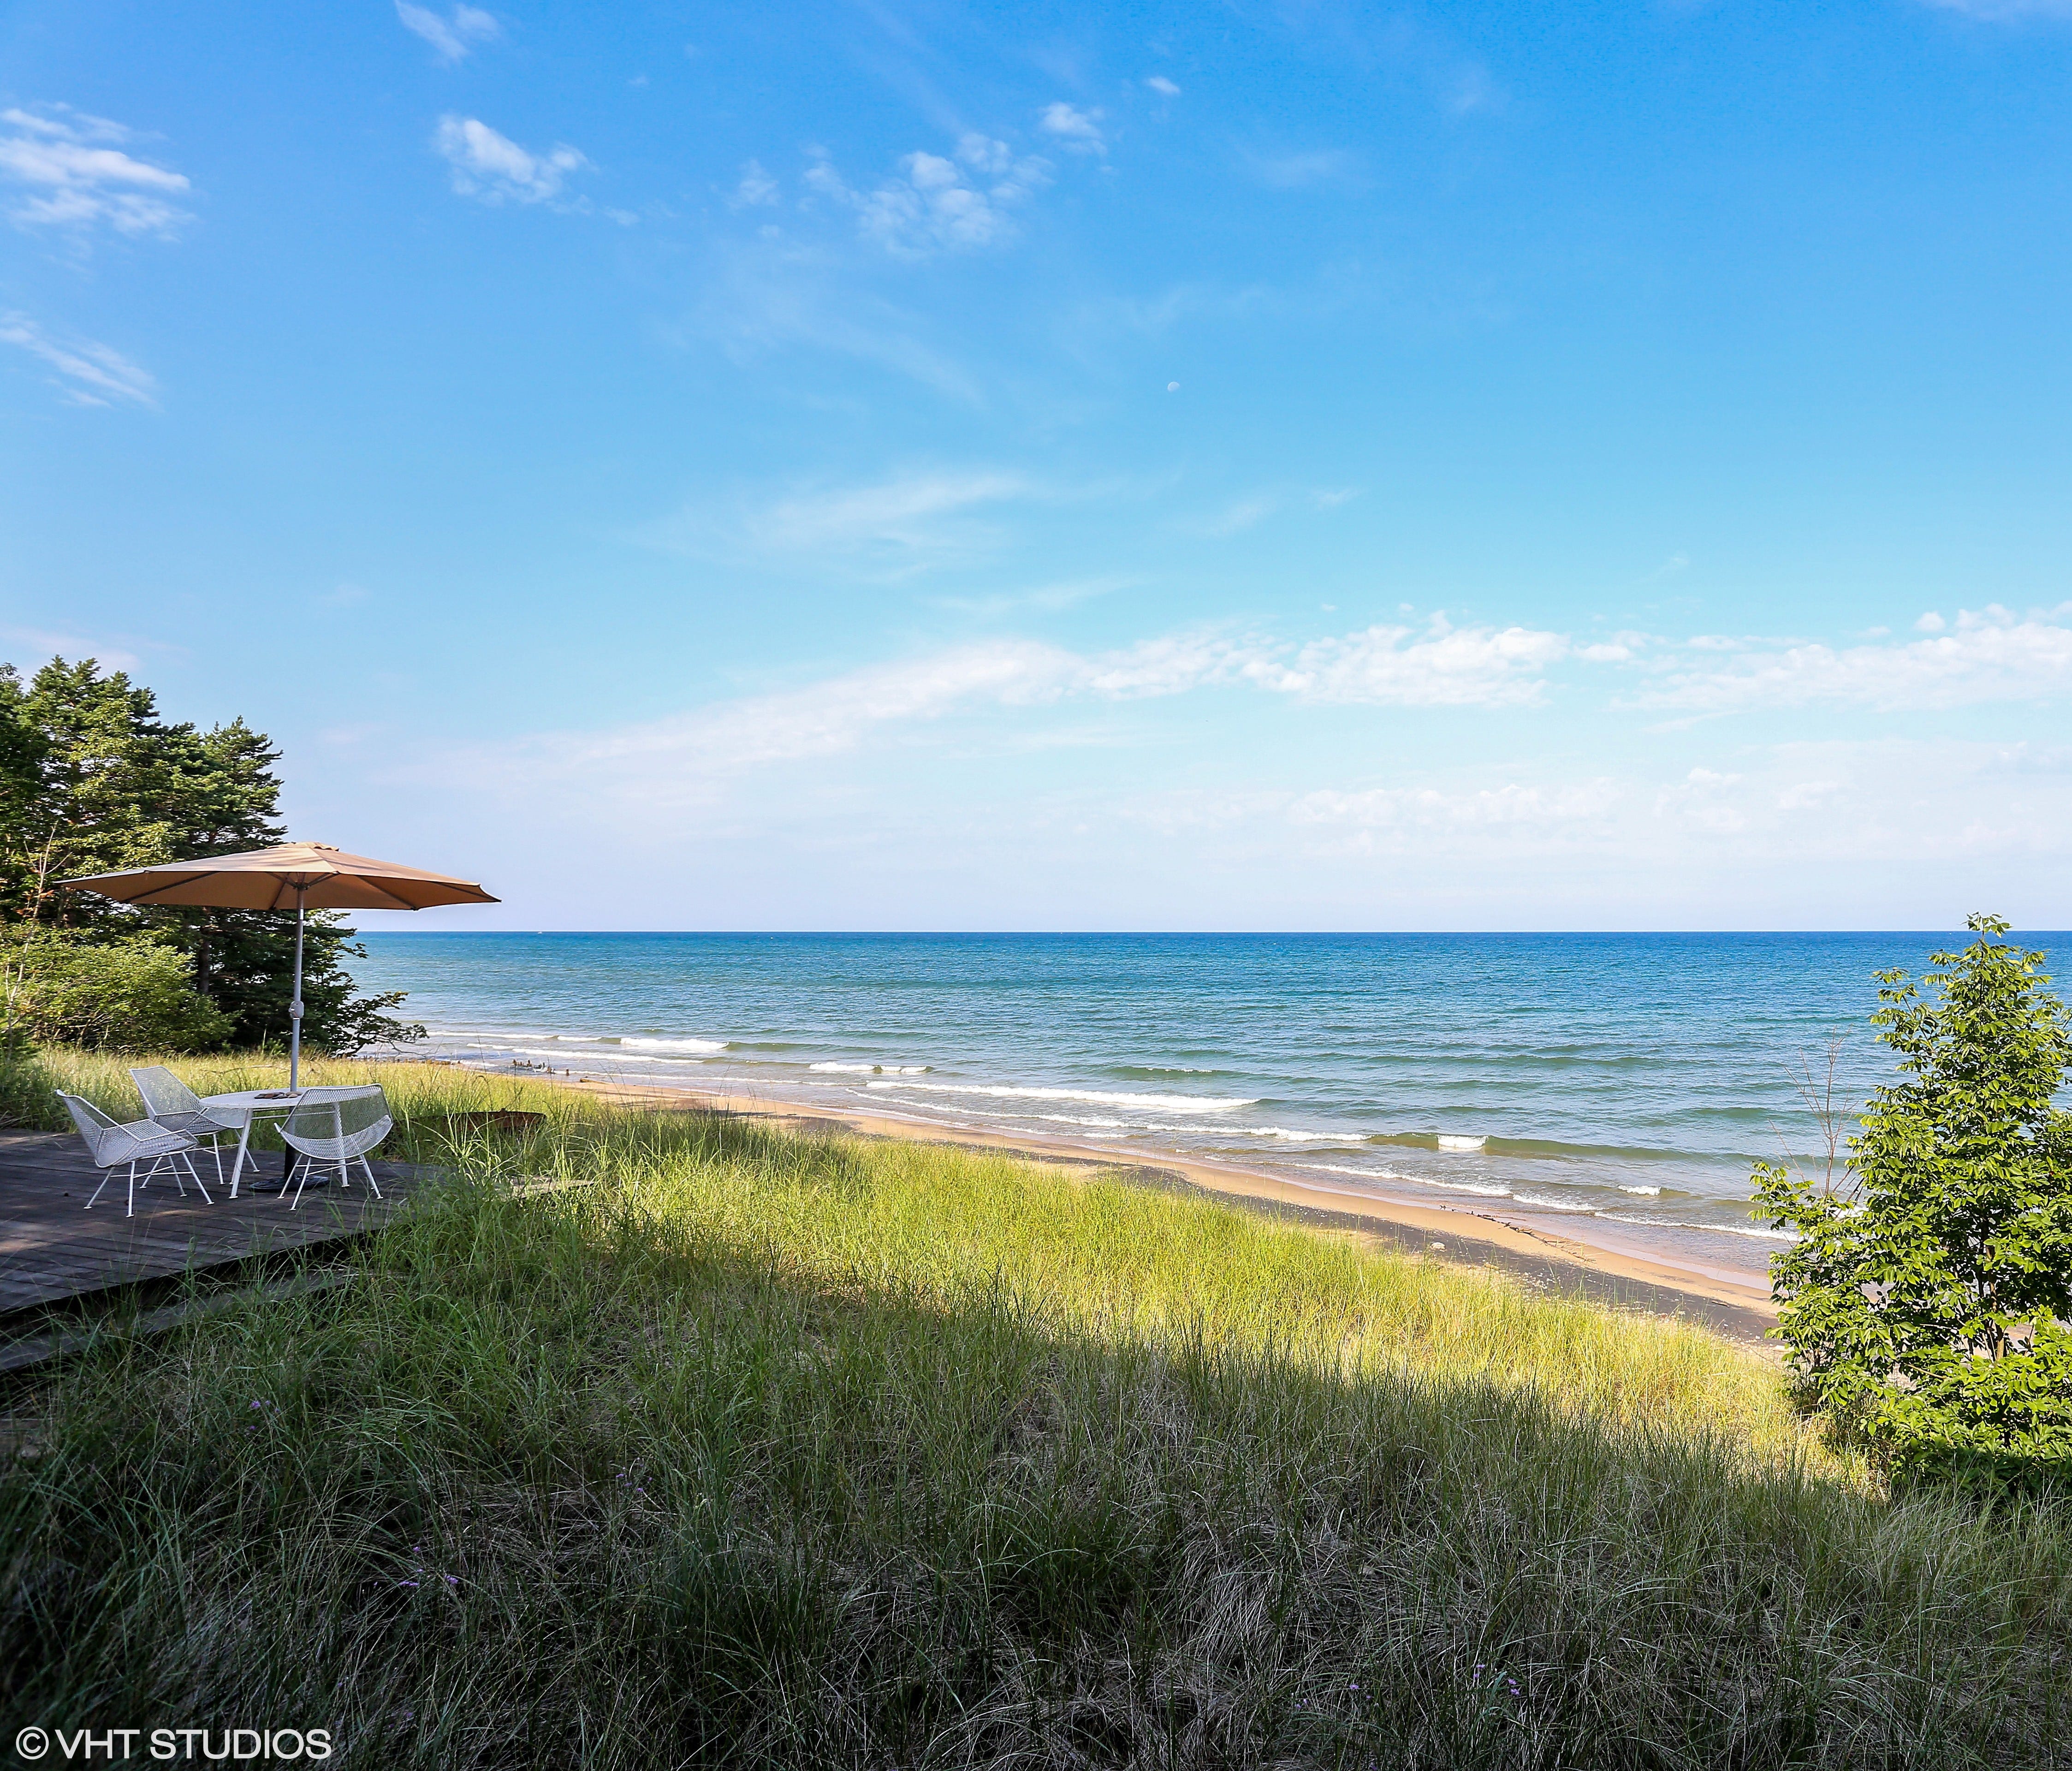 The Blue Star Highway home on Lake Michigan has a detached Coach House with kitchenette,full bath and private deck. The property also has a Hot Tub Pavilion.